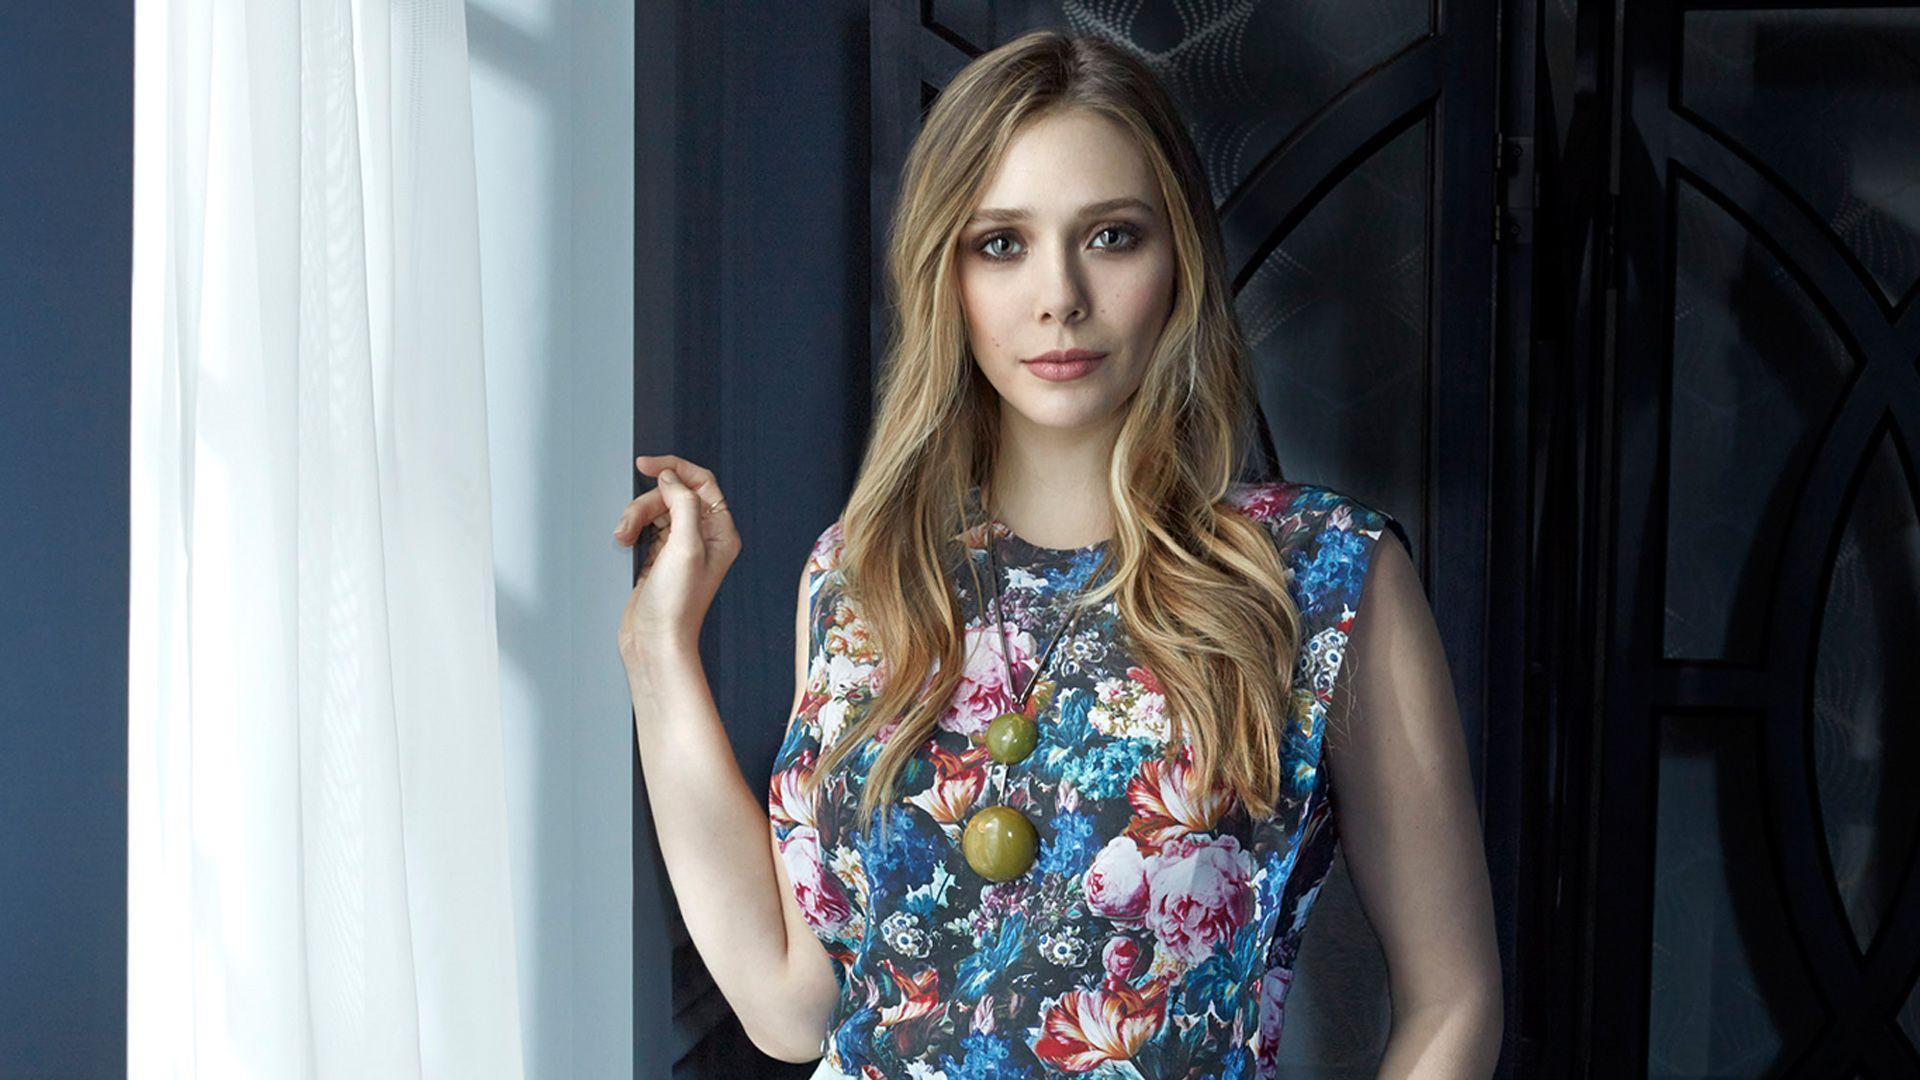 Elizabeth Olsen Wallpaper : Elizabeth Olsen Wallpapers, Pictures